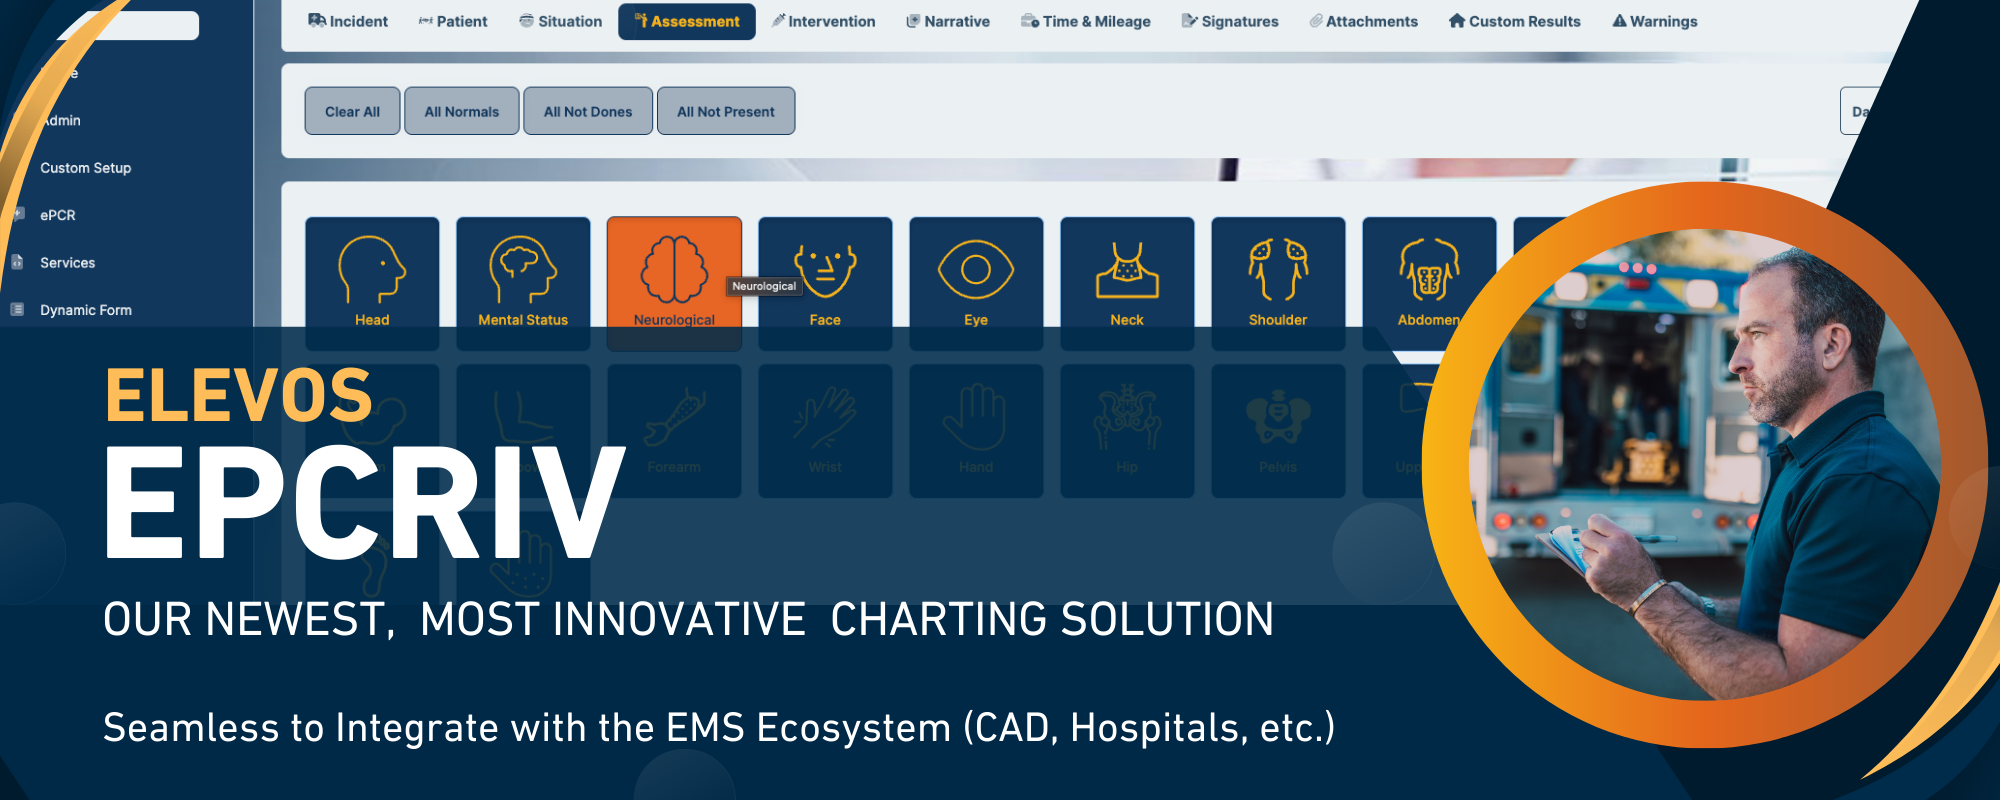 ePCRIV- Our newest, most innovative charting solution. Seamless to integrate with the EMS ecosystem (CAD, Hospitals, etc.)